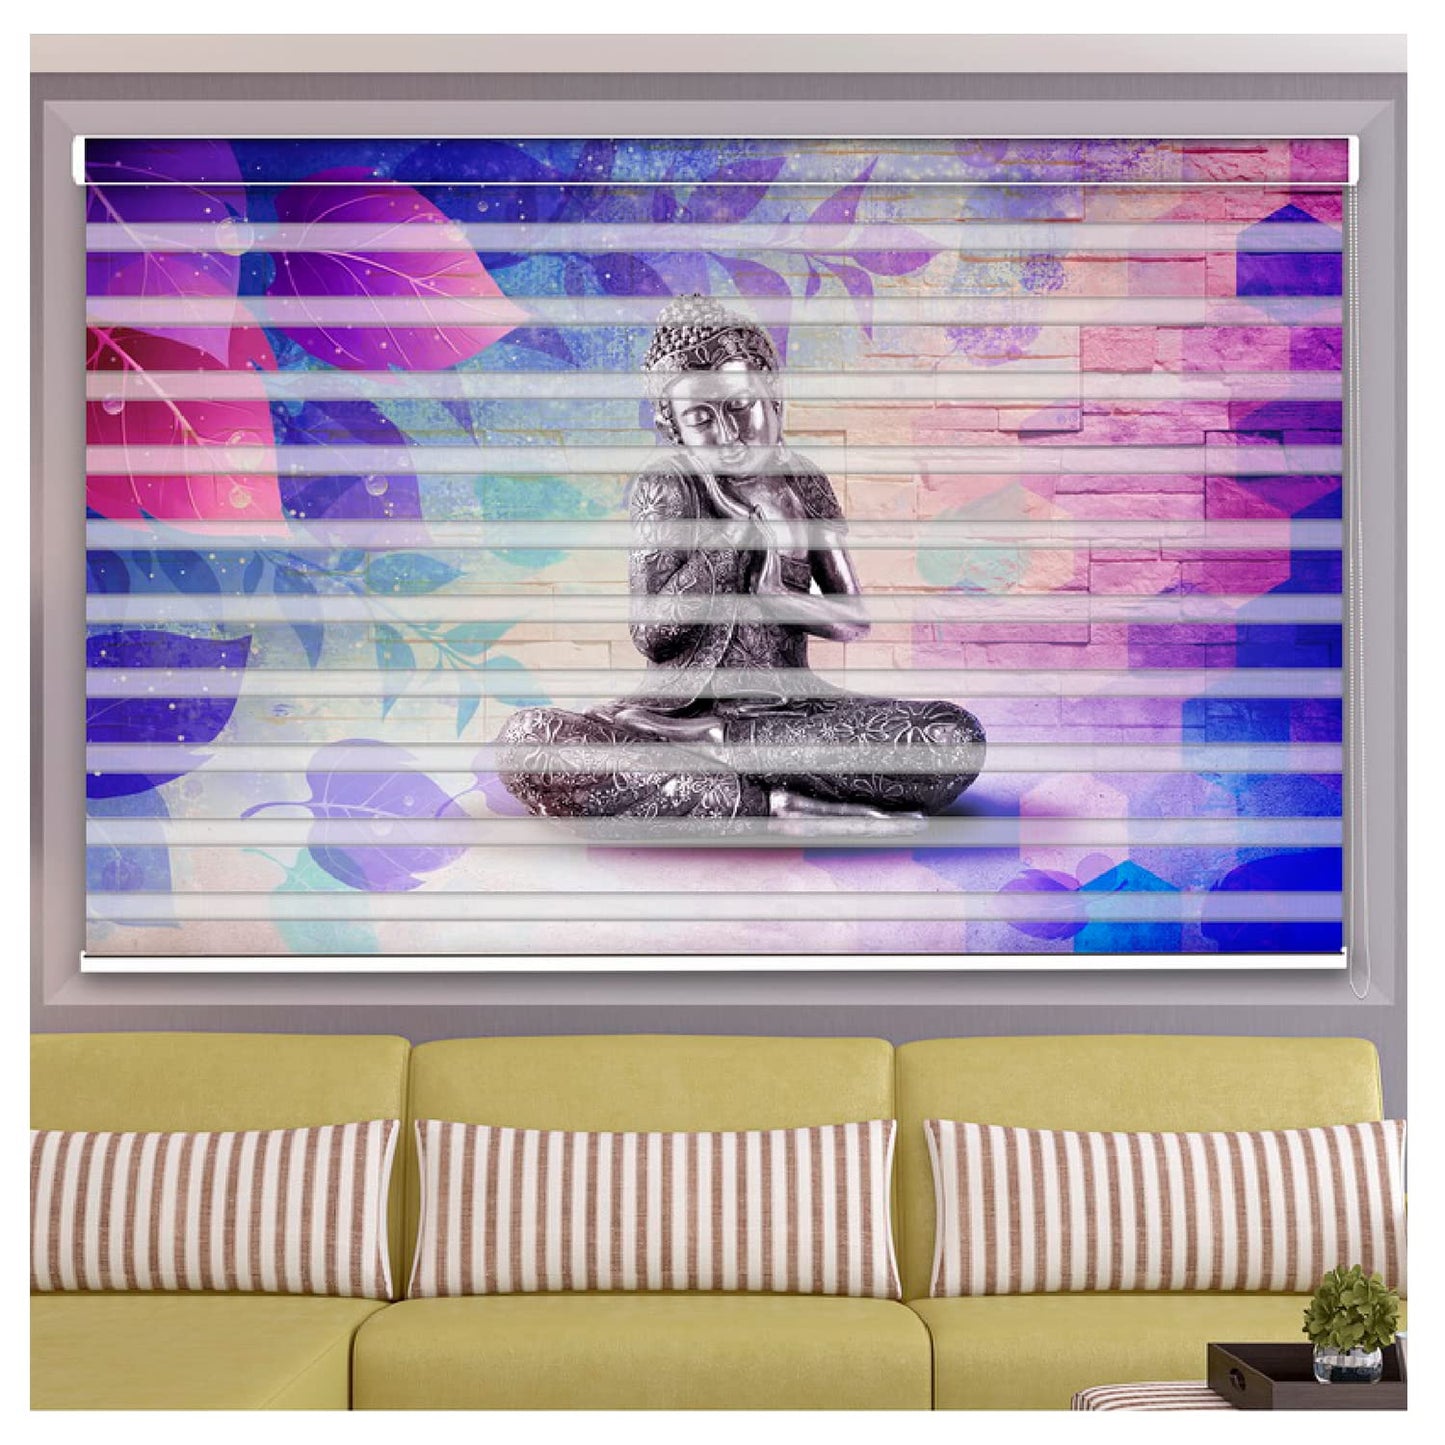 Zebra Blinds for Windows and Doors with Dual Shade, Horizontal Stripes, Blinds for Home & Office (Customized Size, Buddha Sculpture Design)